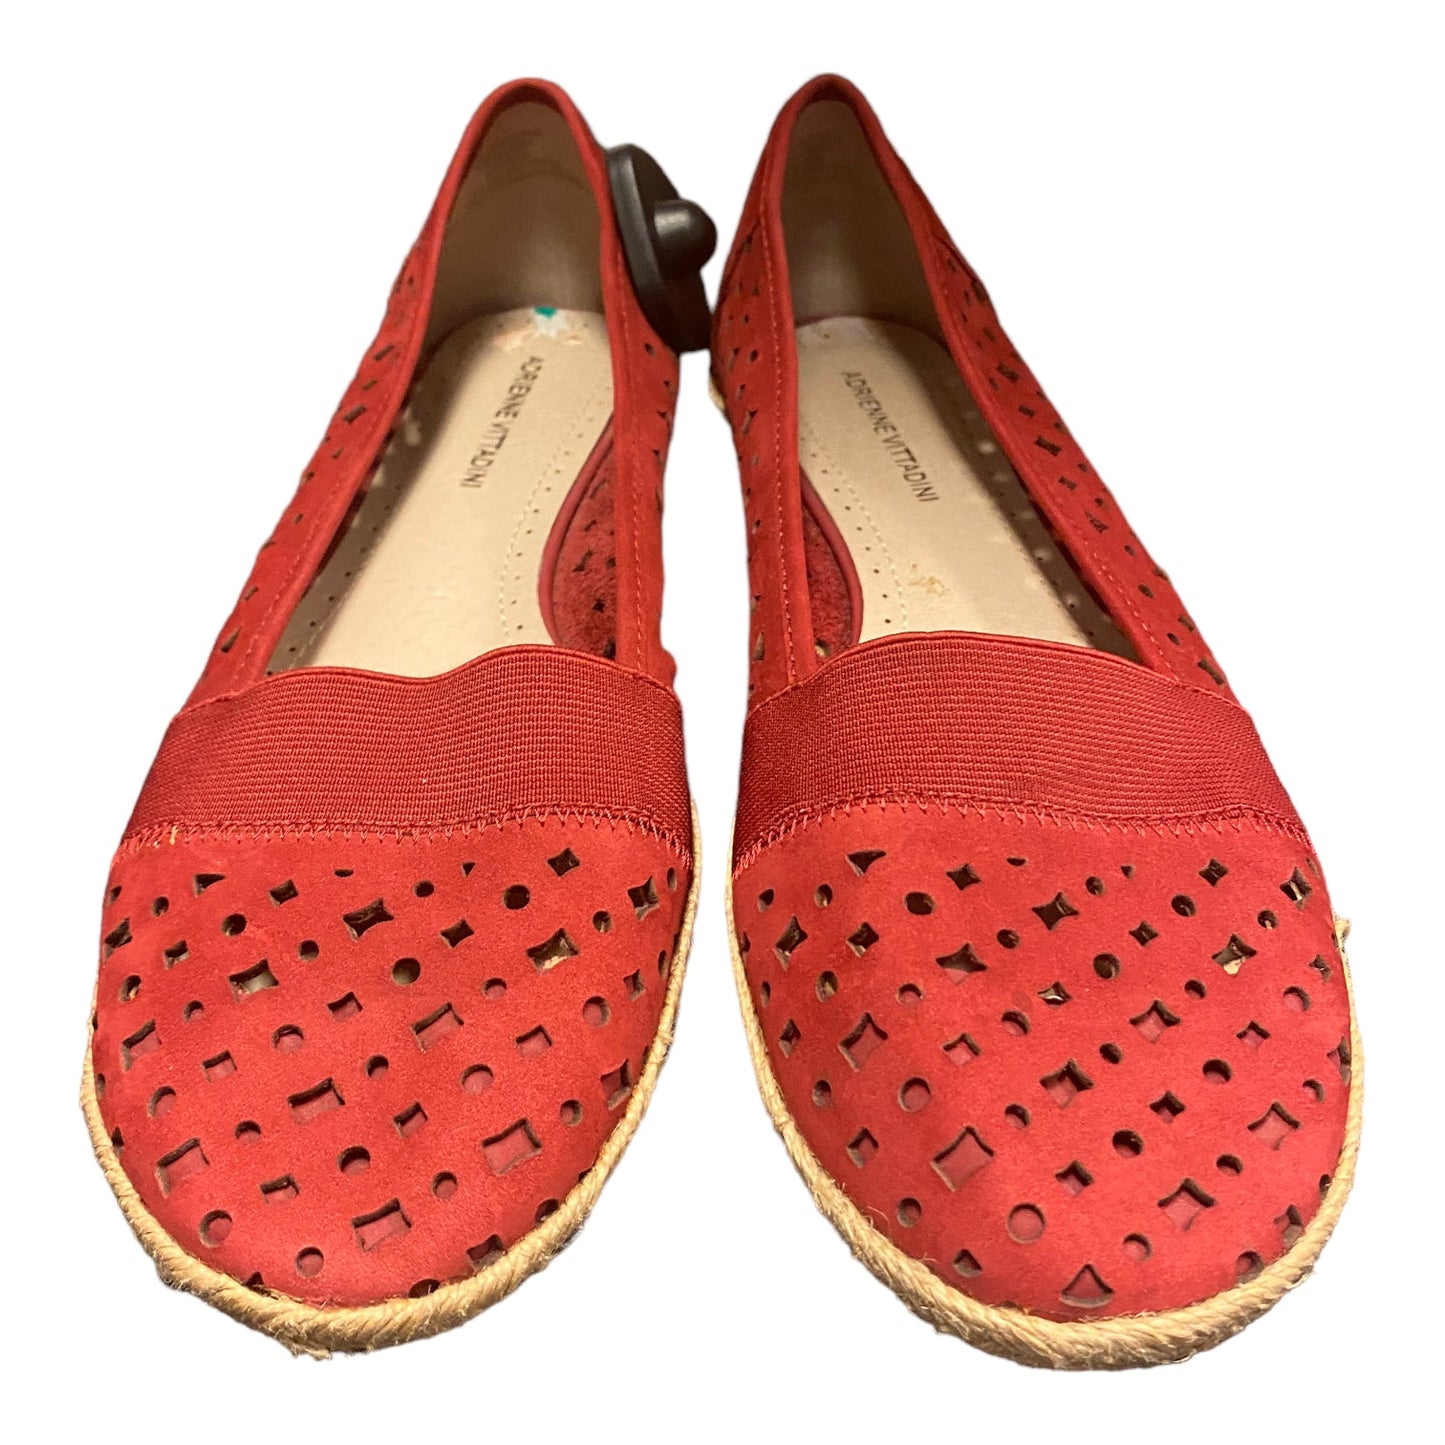 Red Shoes Flats Adrienne Vittadini, Size 8